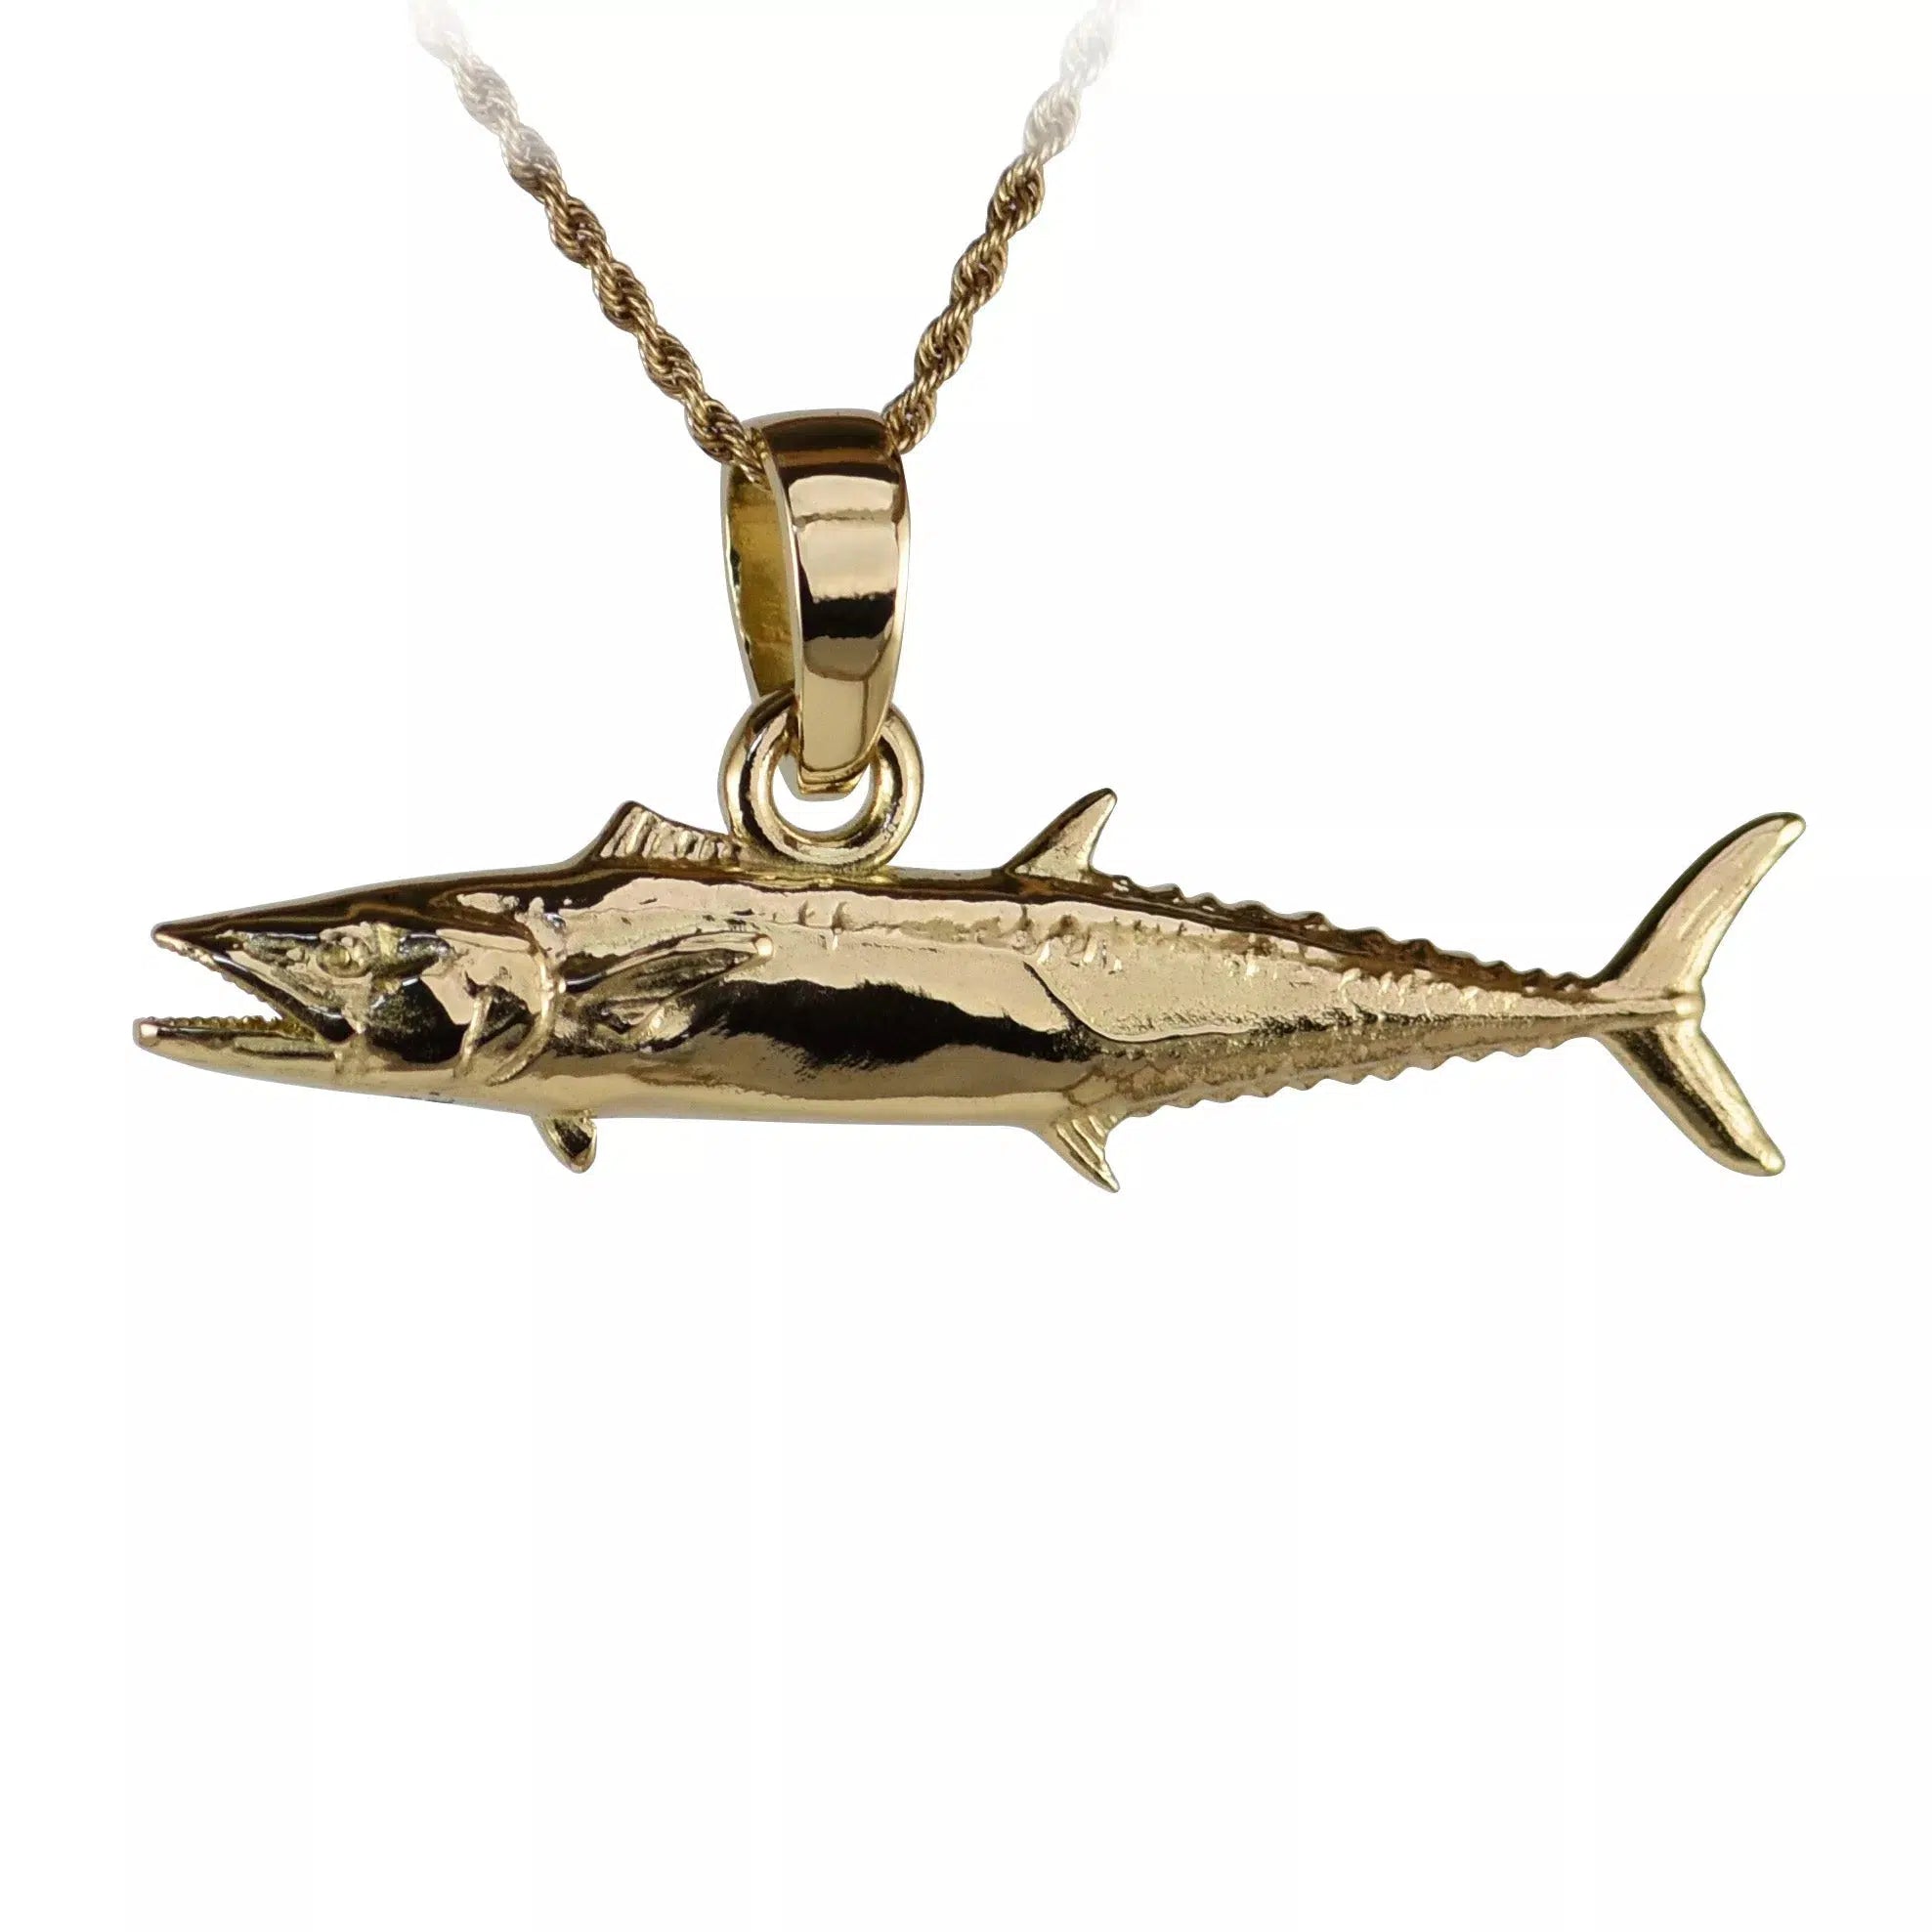 King Mackerel Fish Pendant | The Sea Shur Nautical Jewelry Collection 14K Solid White Gold